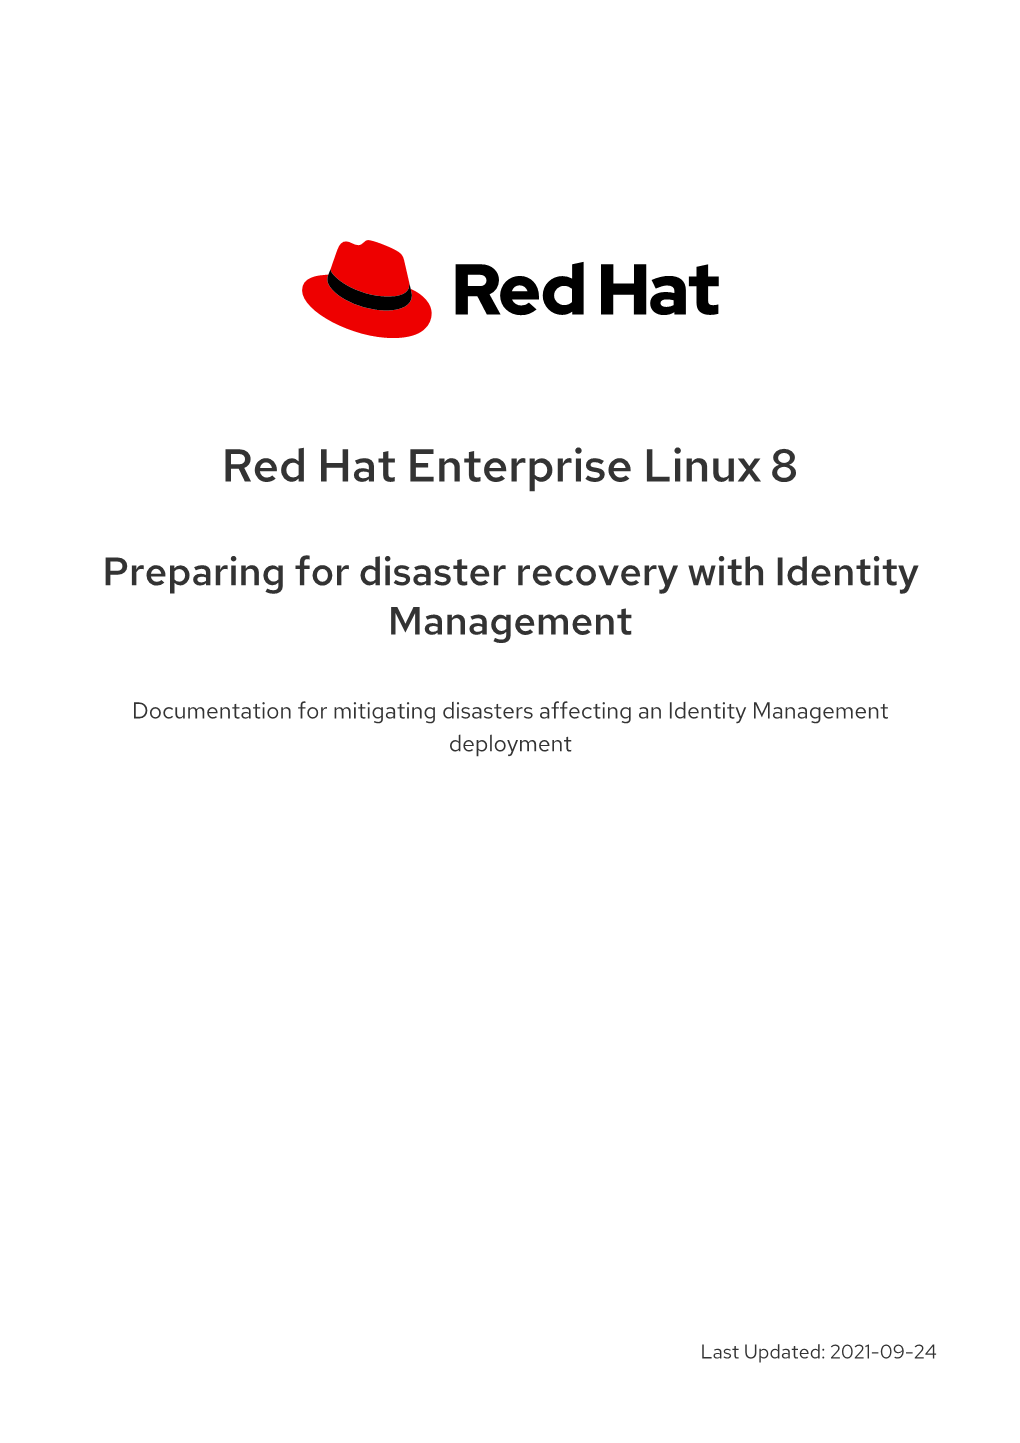 Red Hat Enterprise Linux 8 Preparing for Disaster Recovery with Identity Management